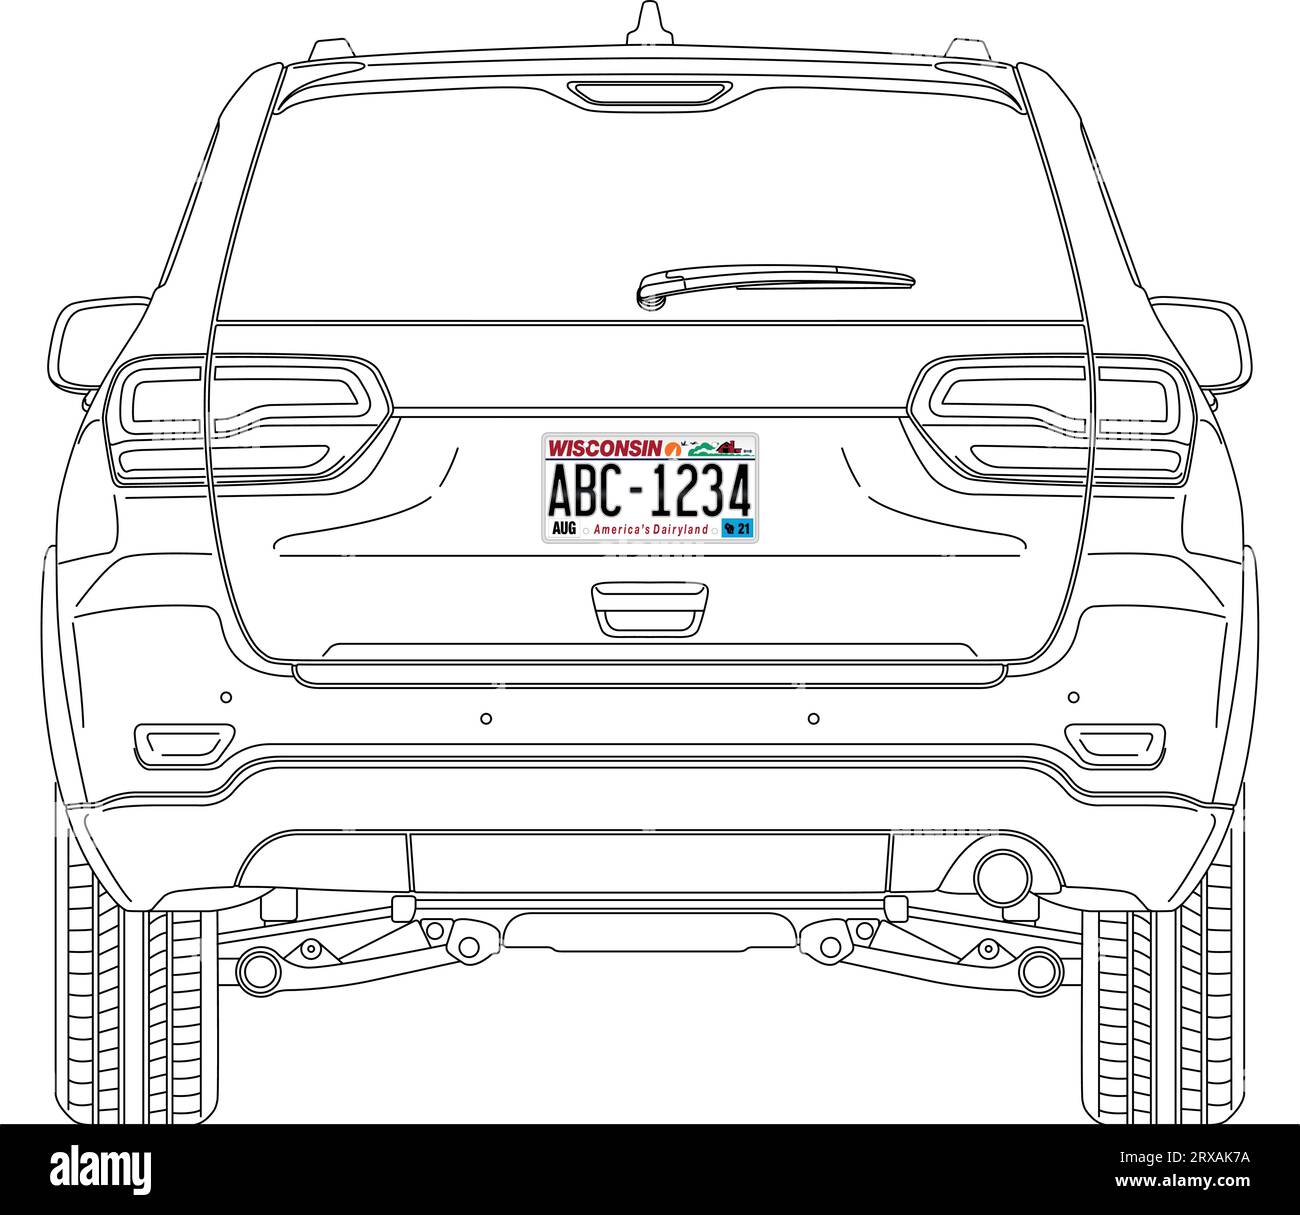 Wisconsin State car license plate in the back of a car, USA, United States, vector illustration Stock Vector